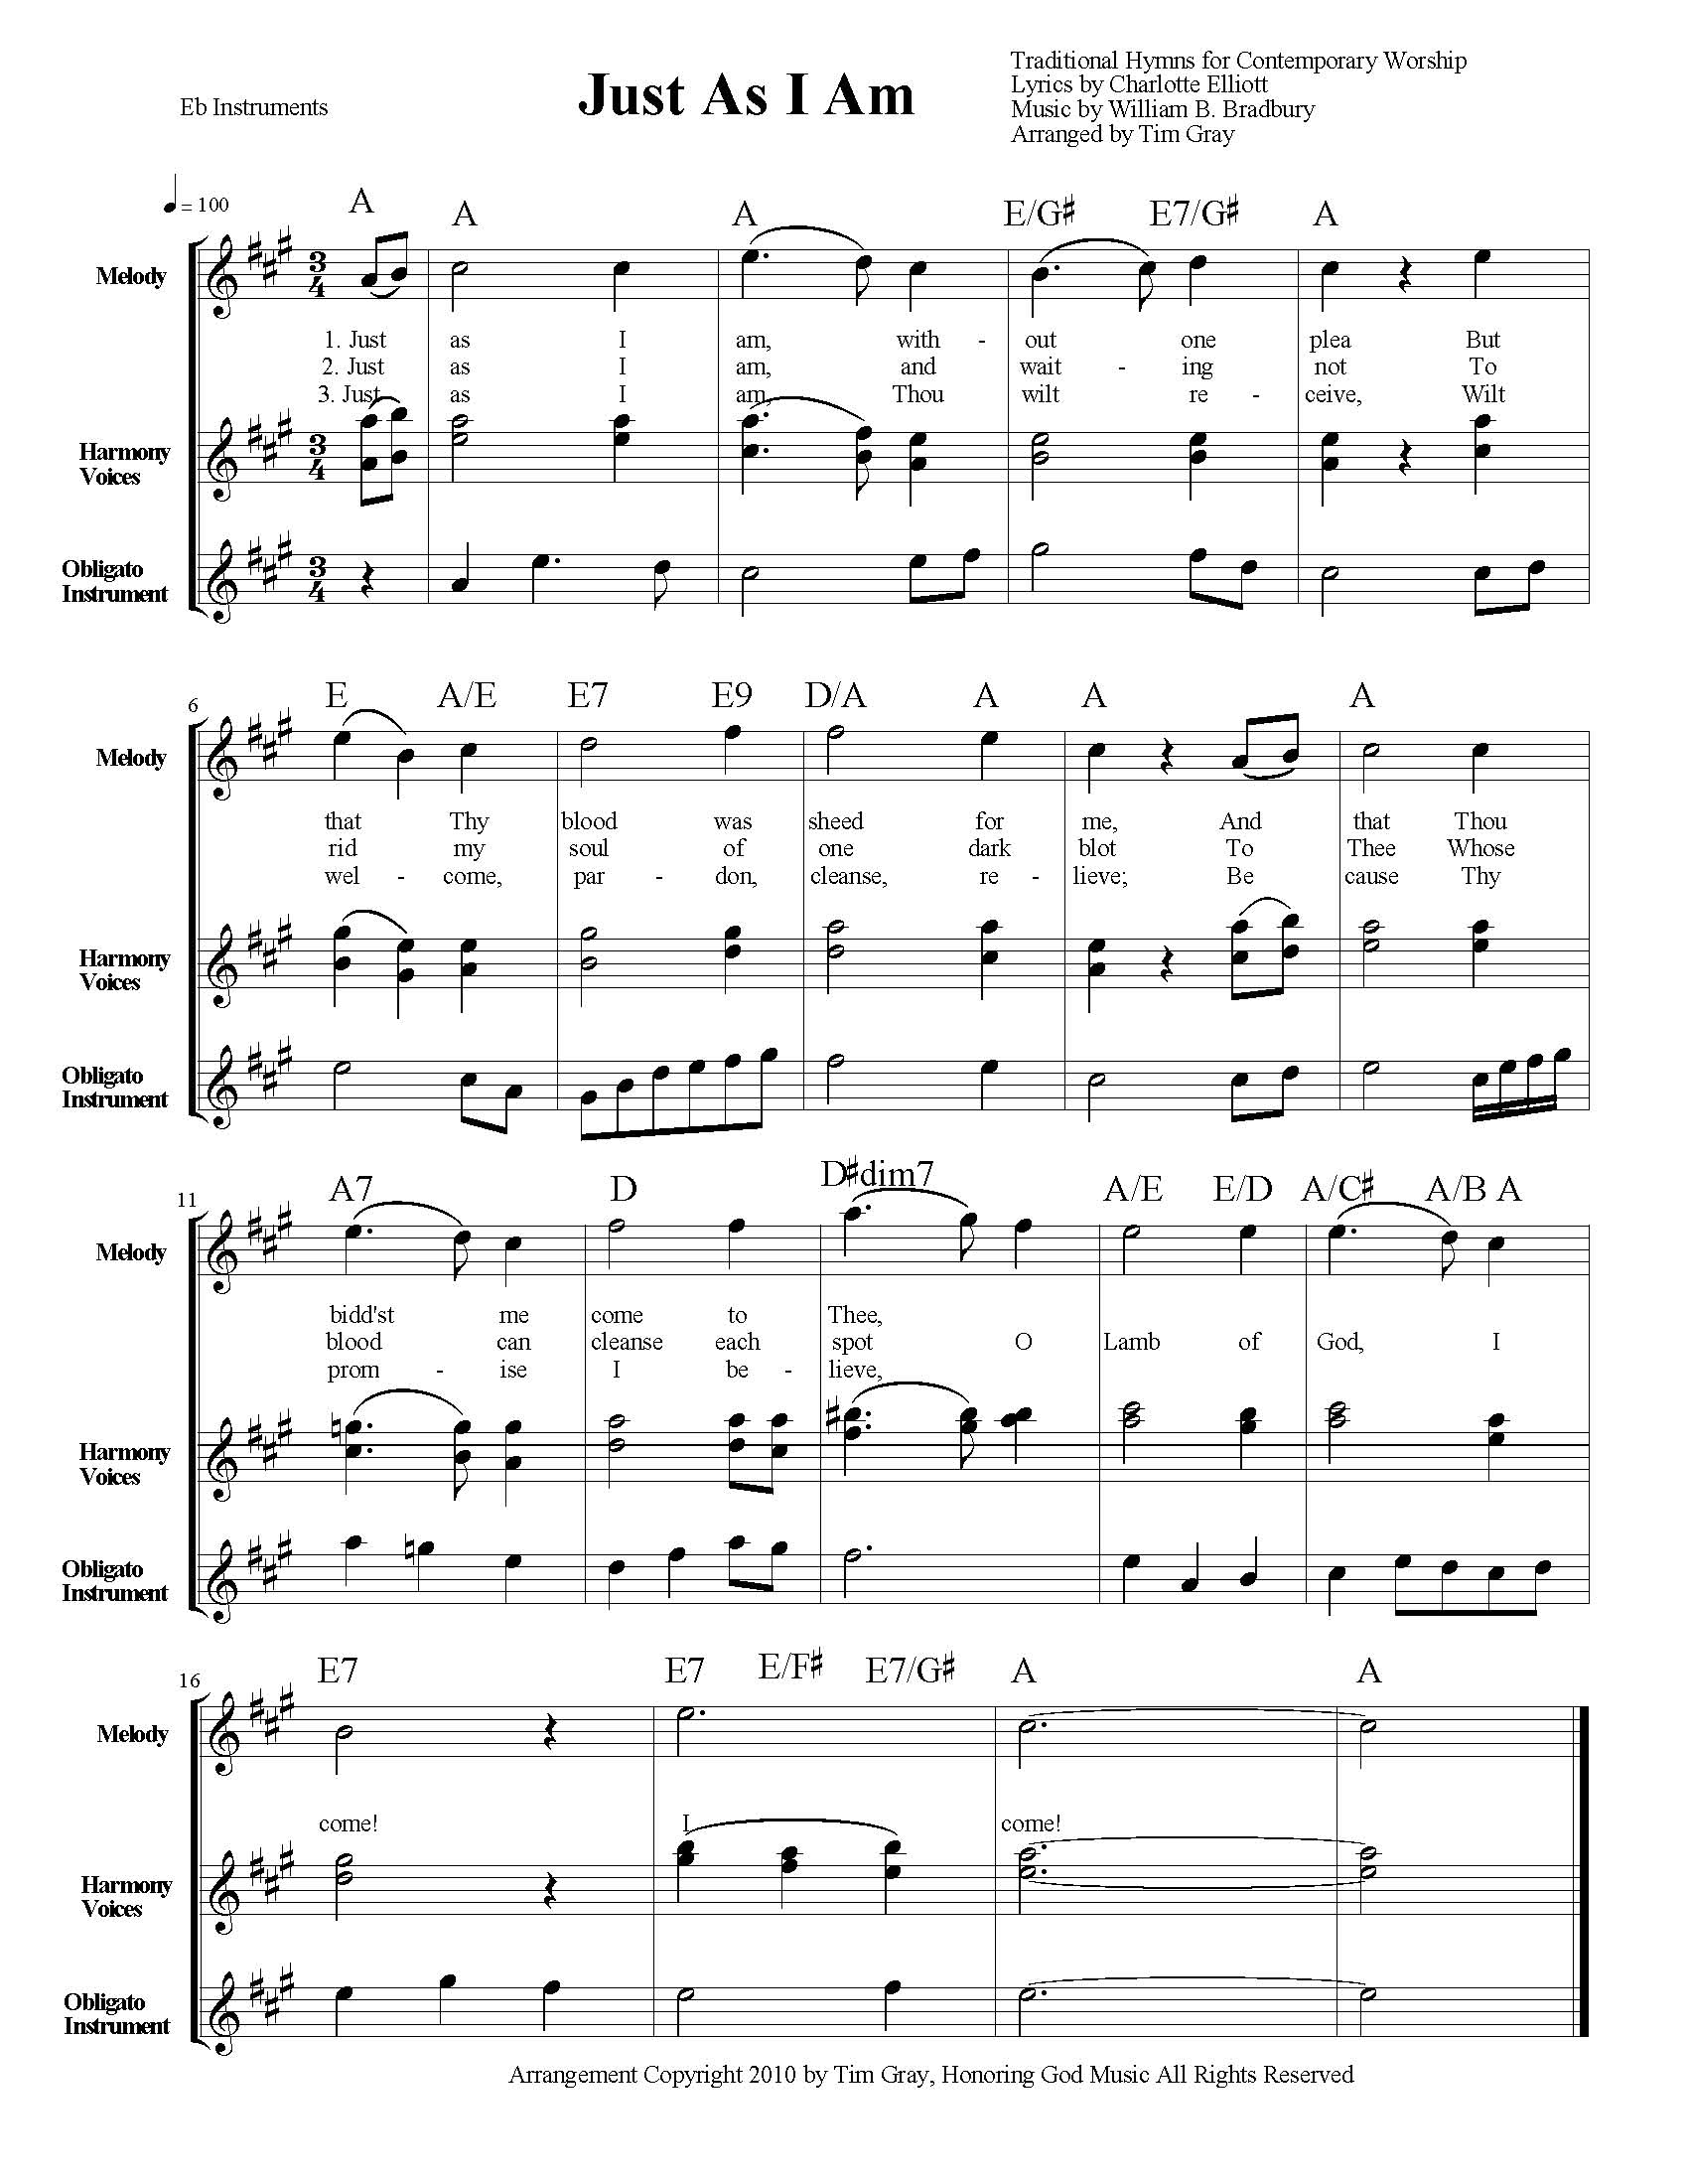 Just As I Am TH4CW Traditional Hymns for Contemporary Worship sample page on HonoringGodMusic.com